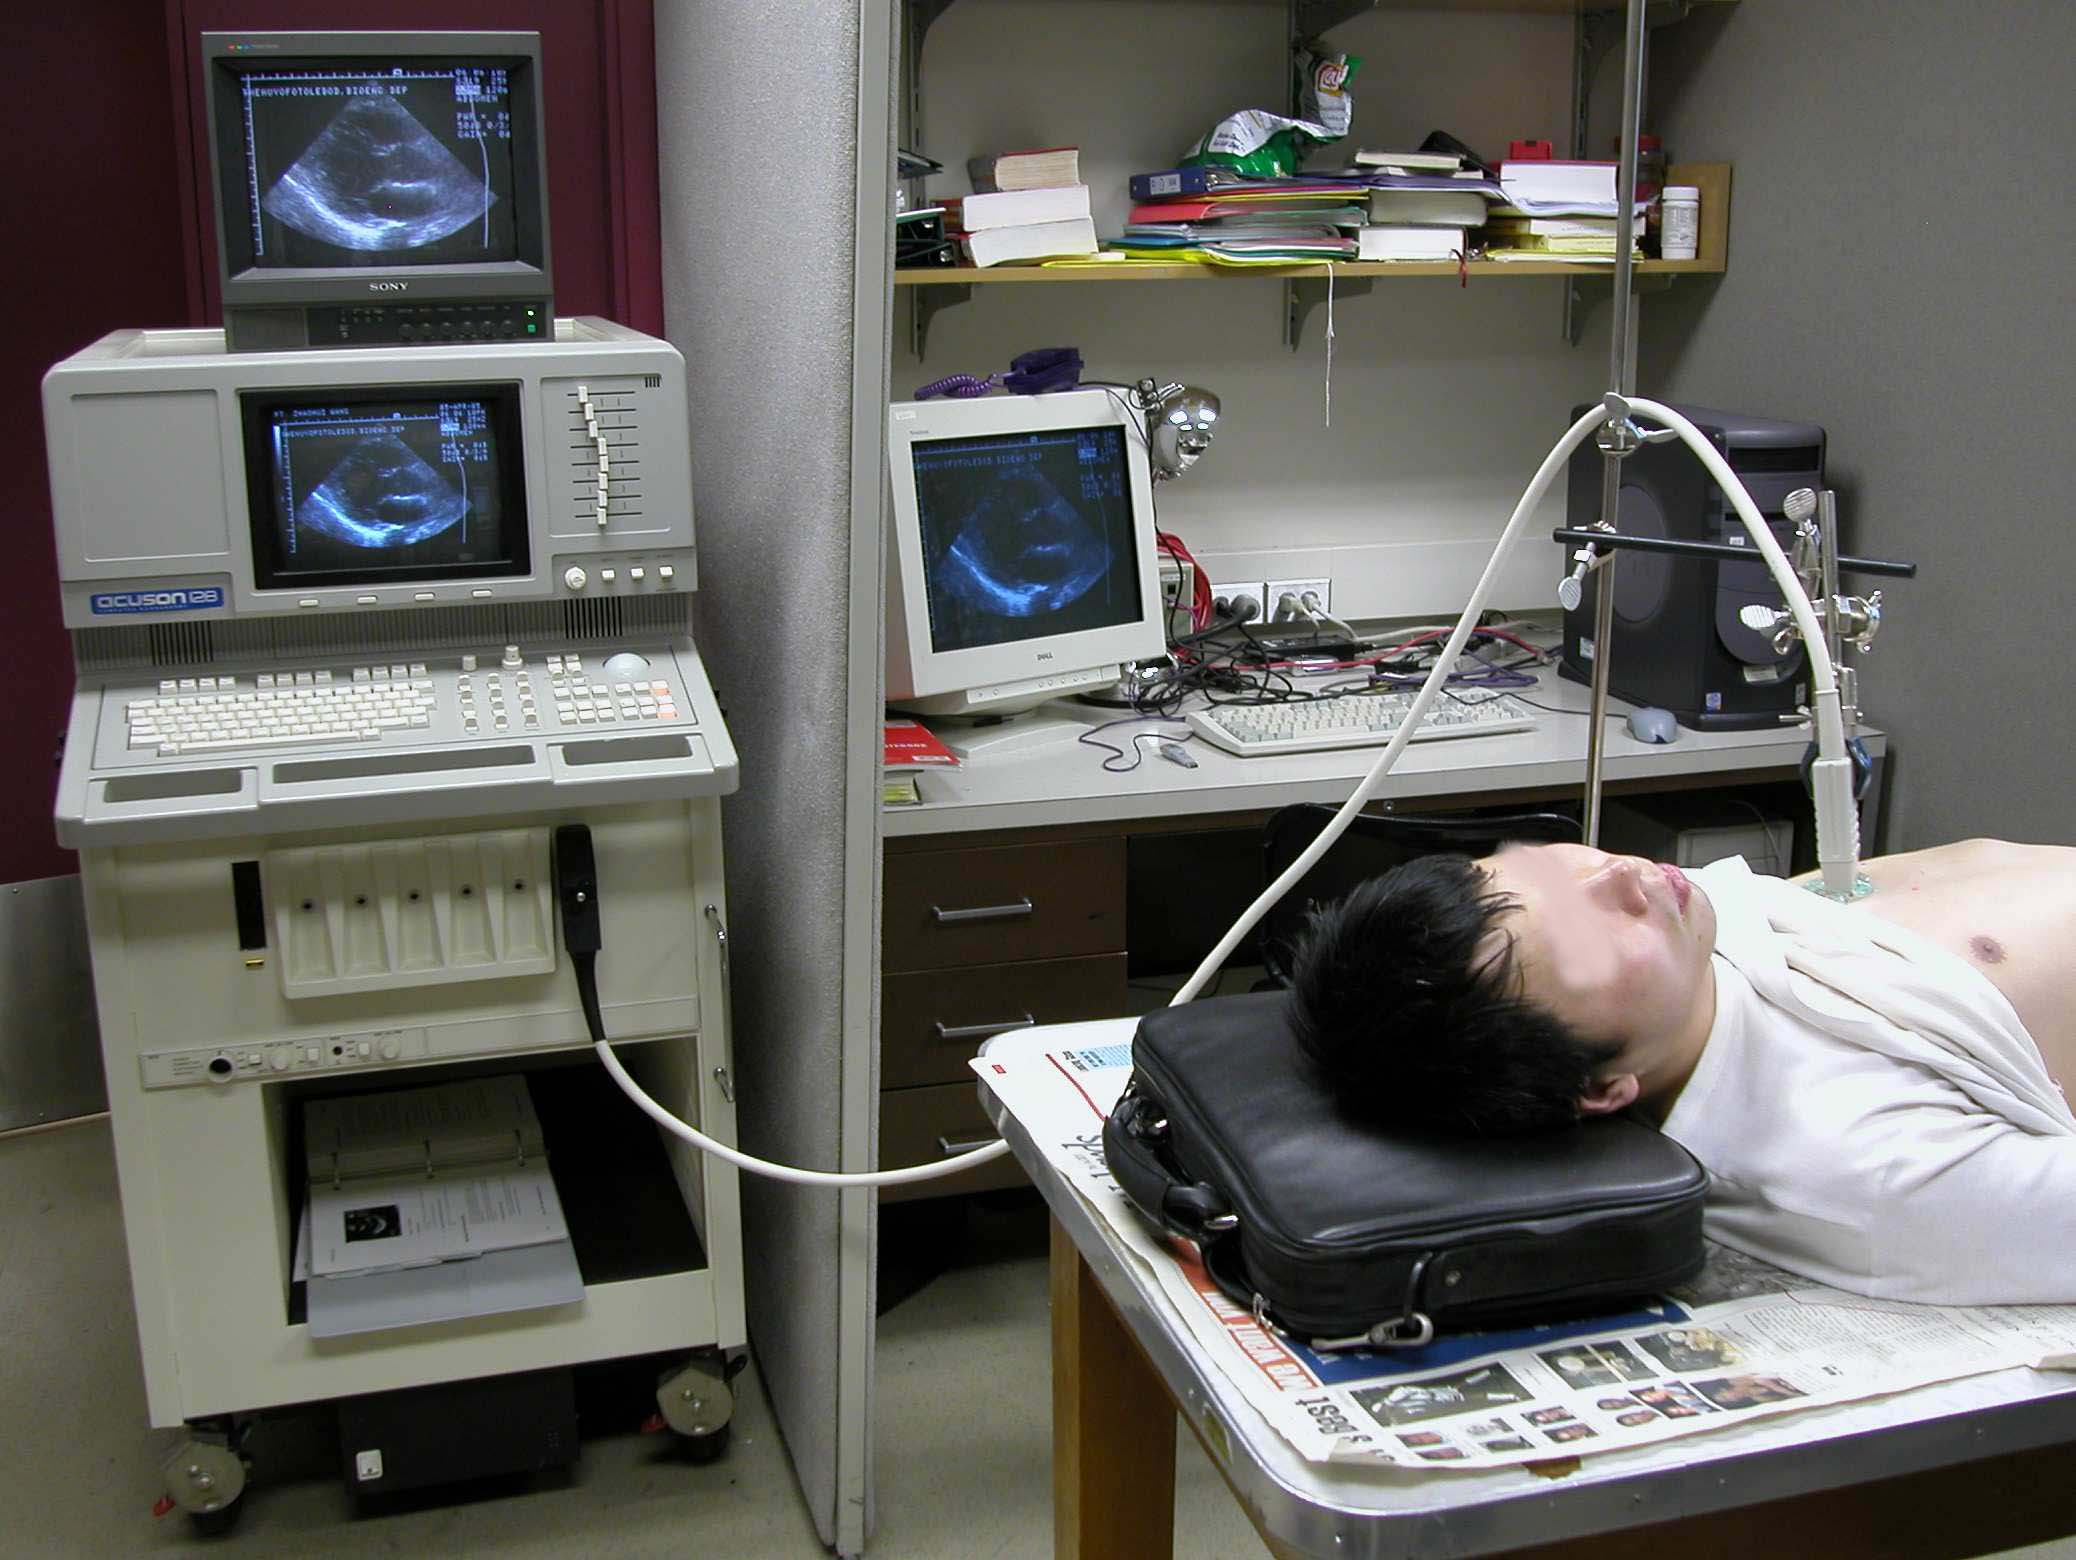  * Cardiac Experiment with the Acuson 128/XP10 Ultrasound Imaging System * 